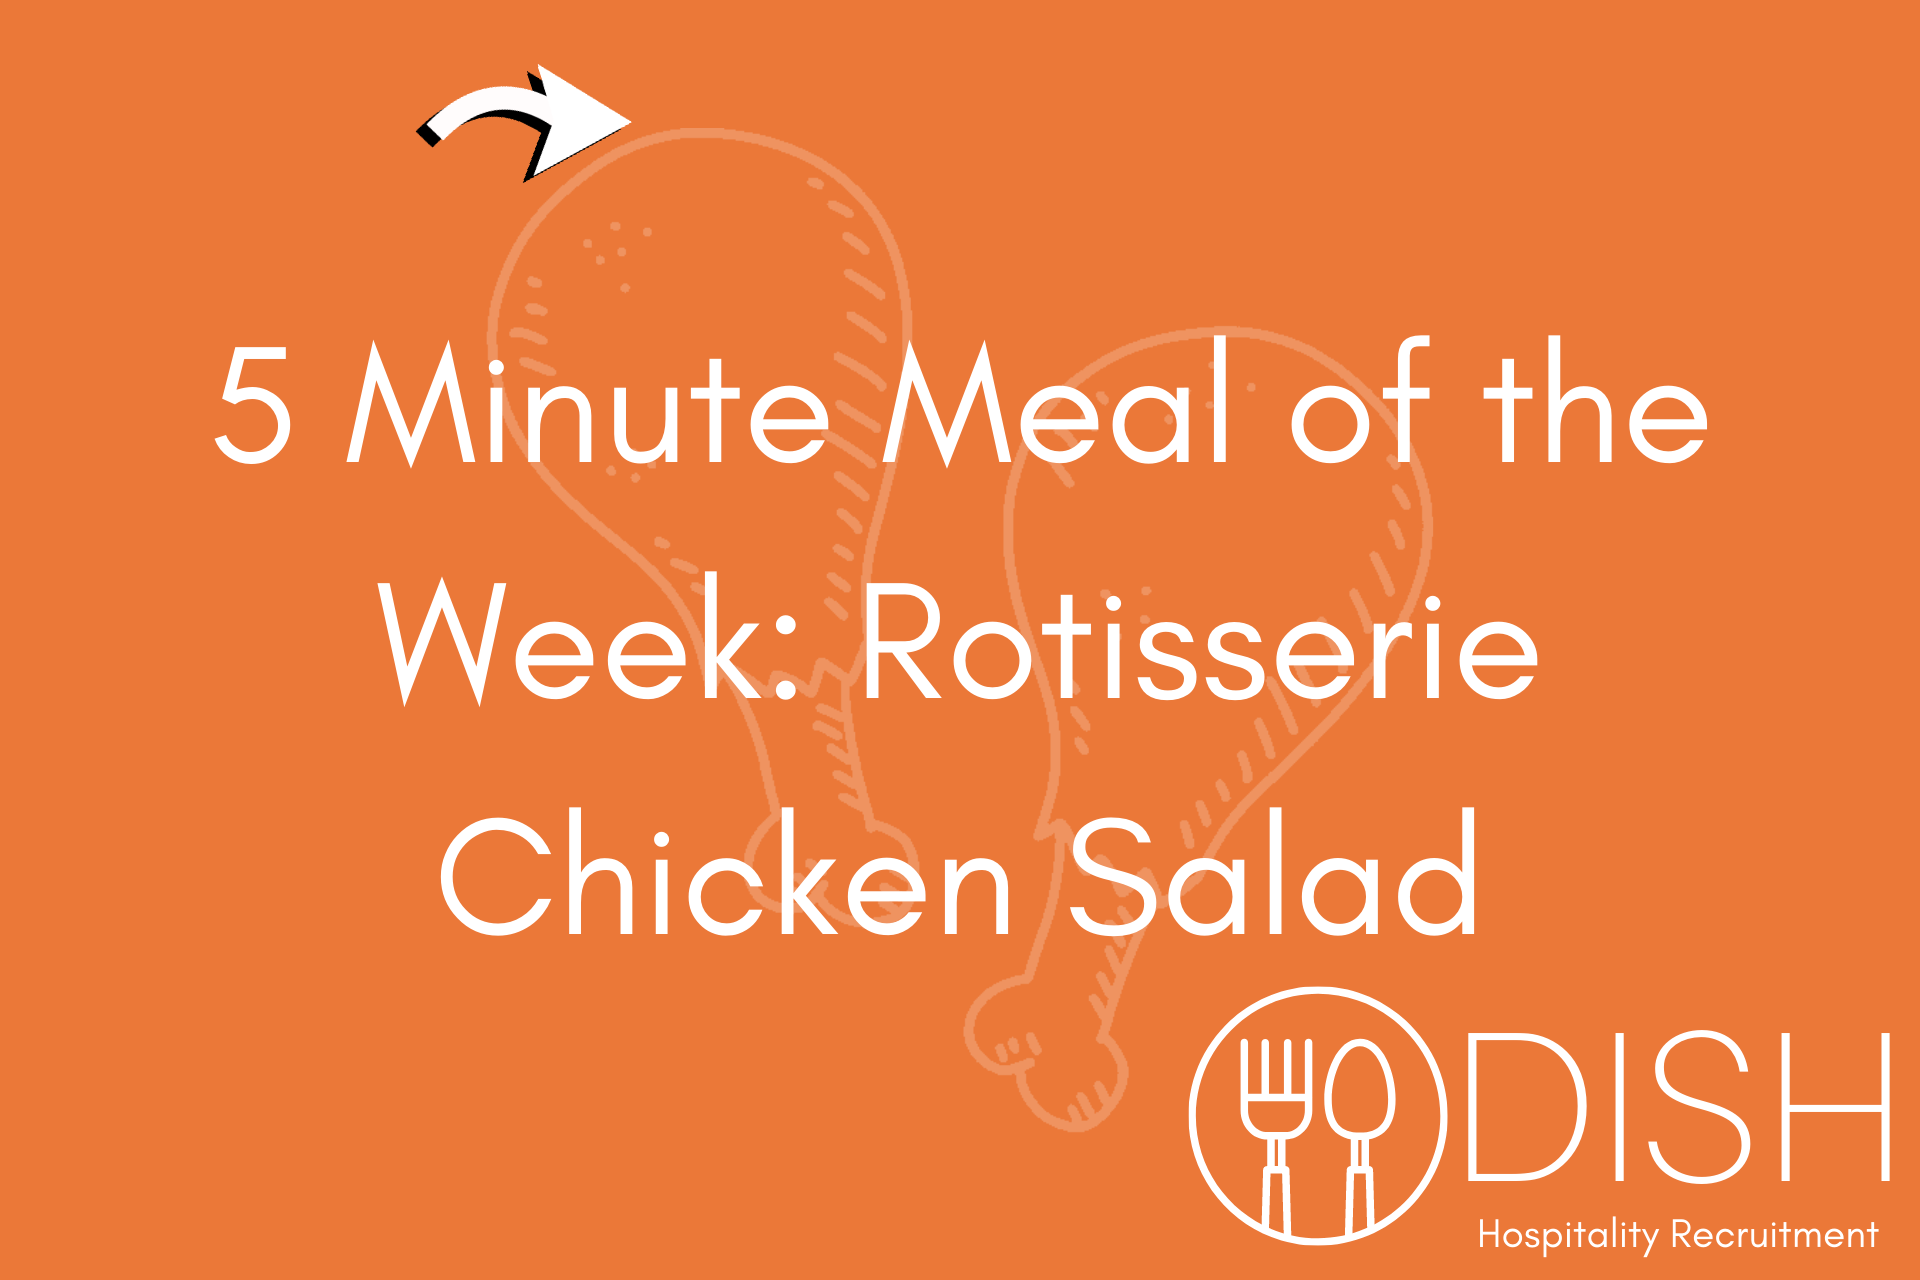 5 Minute Meal of the Week: Rotisserie Chicken Salad